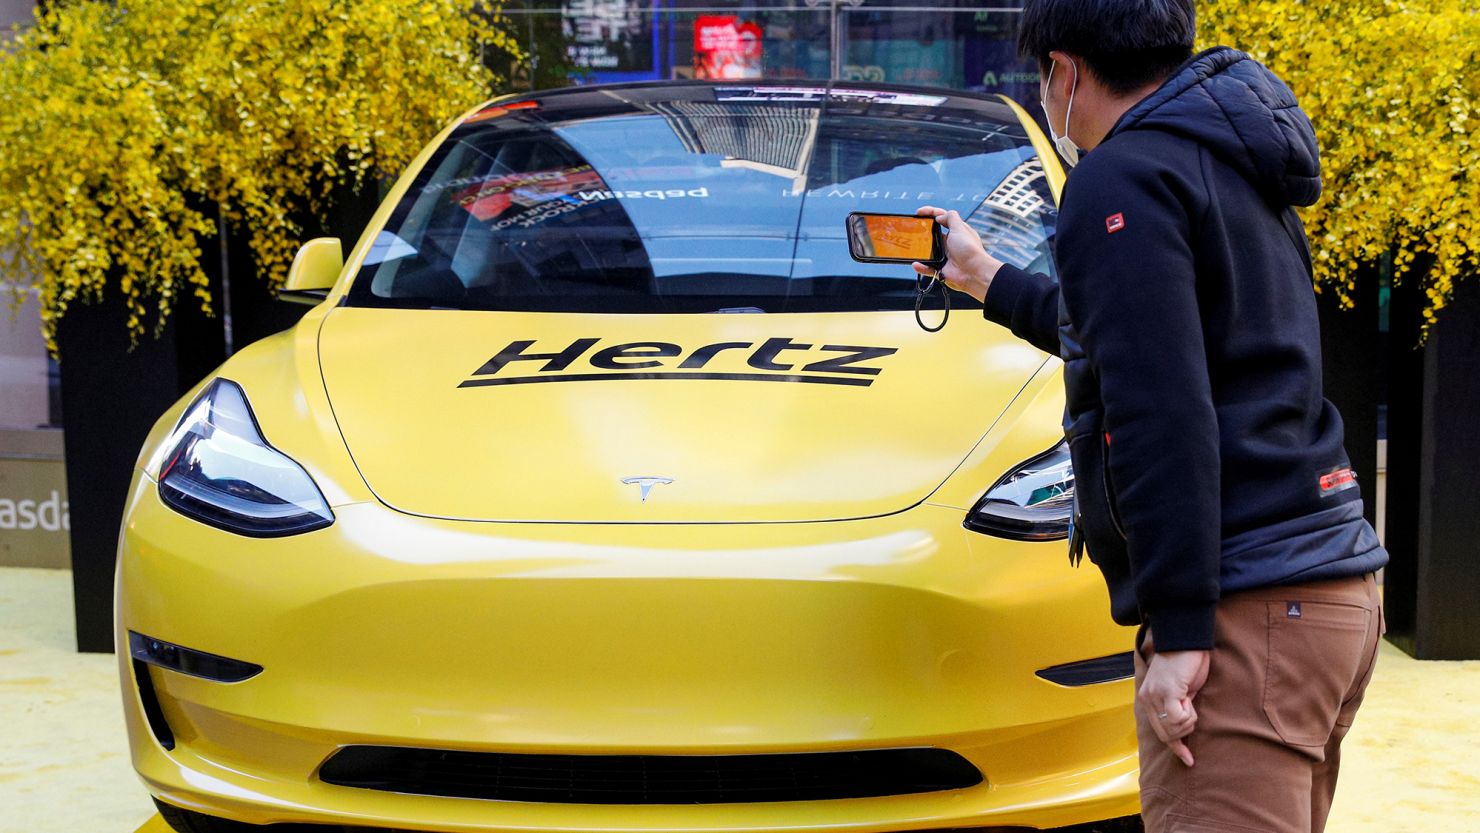 A man photographs a Hertz Tesla electric vehicle displayed during the Hertz Corporation IPO at the Nasdaq Market site in Times Square in New York City.